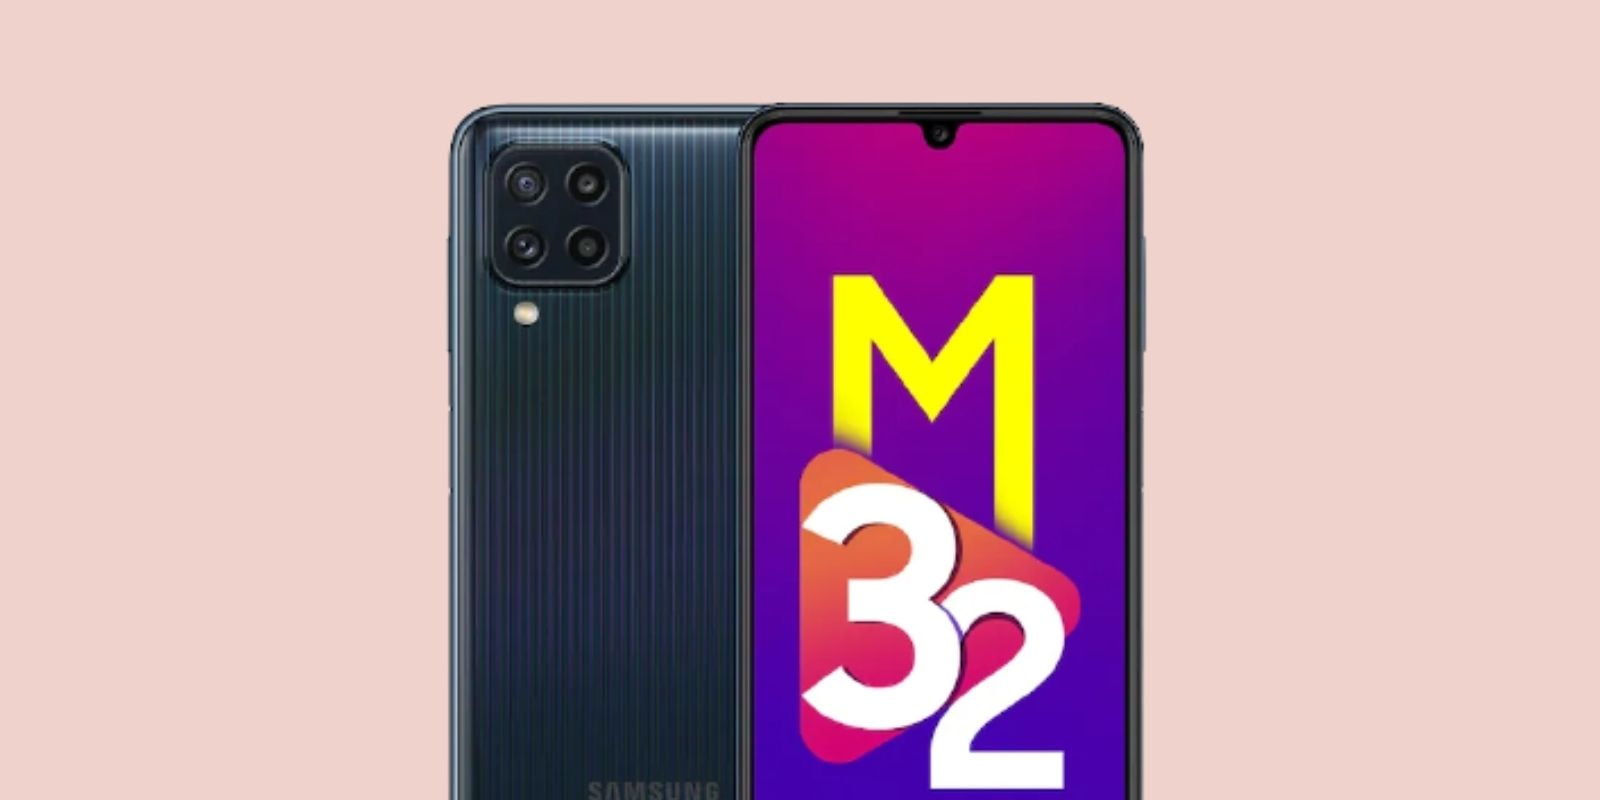 Samsung Launches Galaxy M32 With 90Hz Display And 6,000Mah Battery